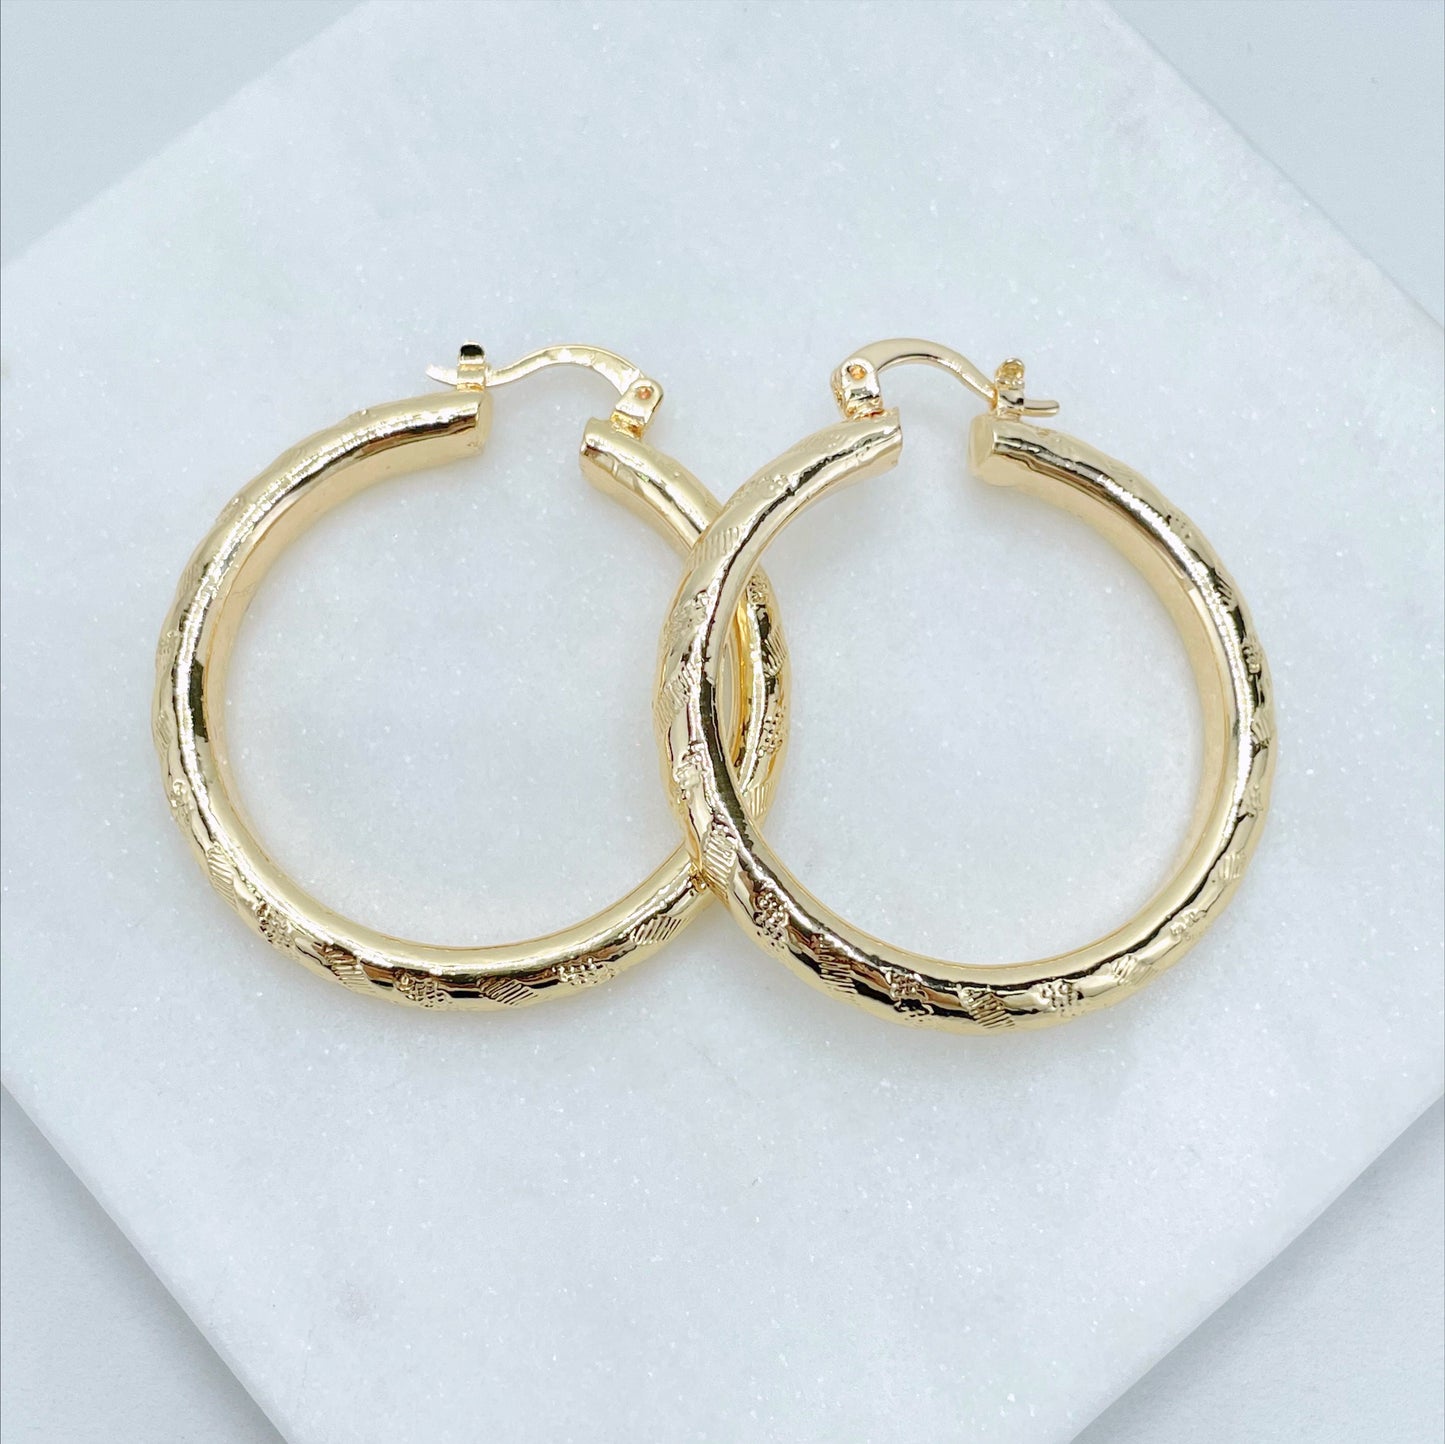 18k Gold Filled 40mm Textured Hoops Earrings, 5mm Thickness, Wholesale Jewelry Making Supplies